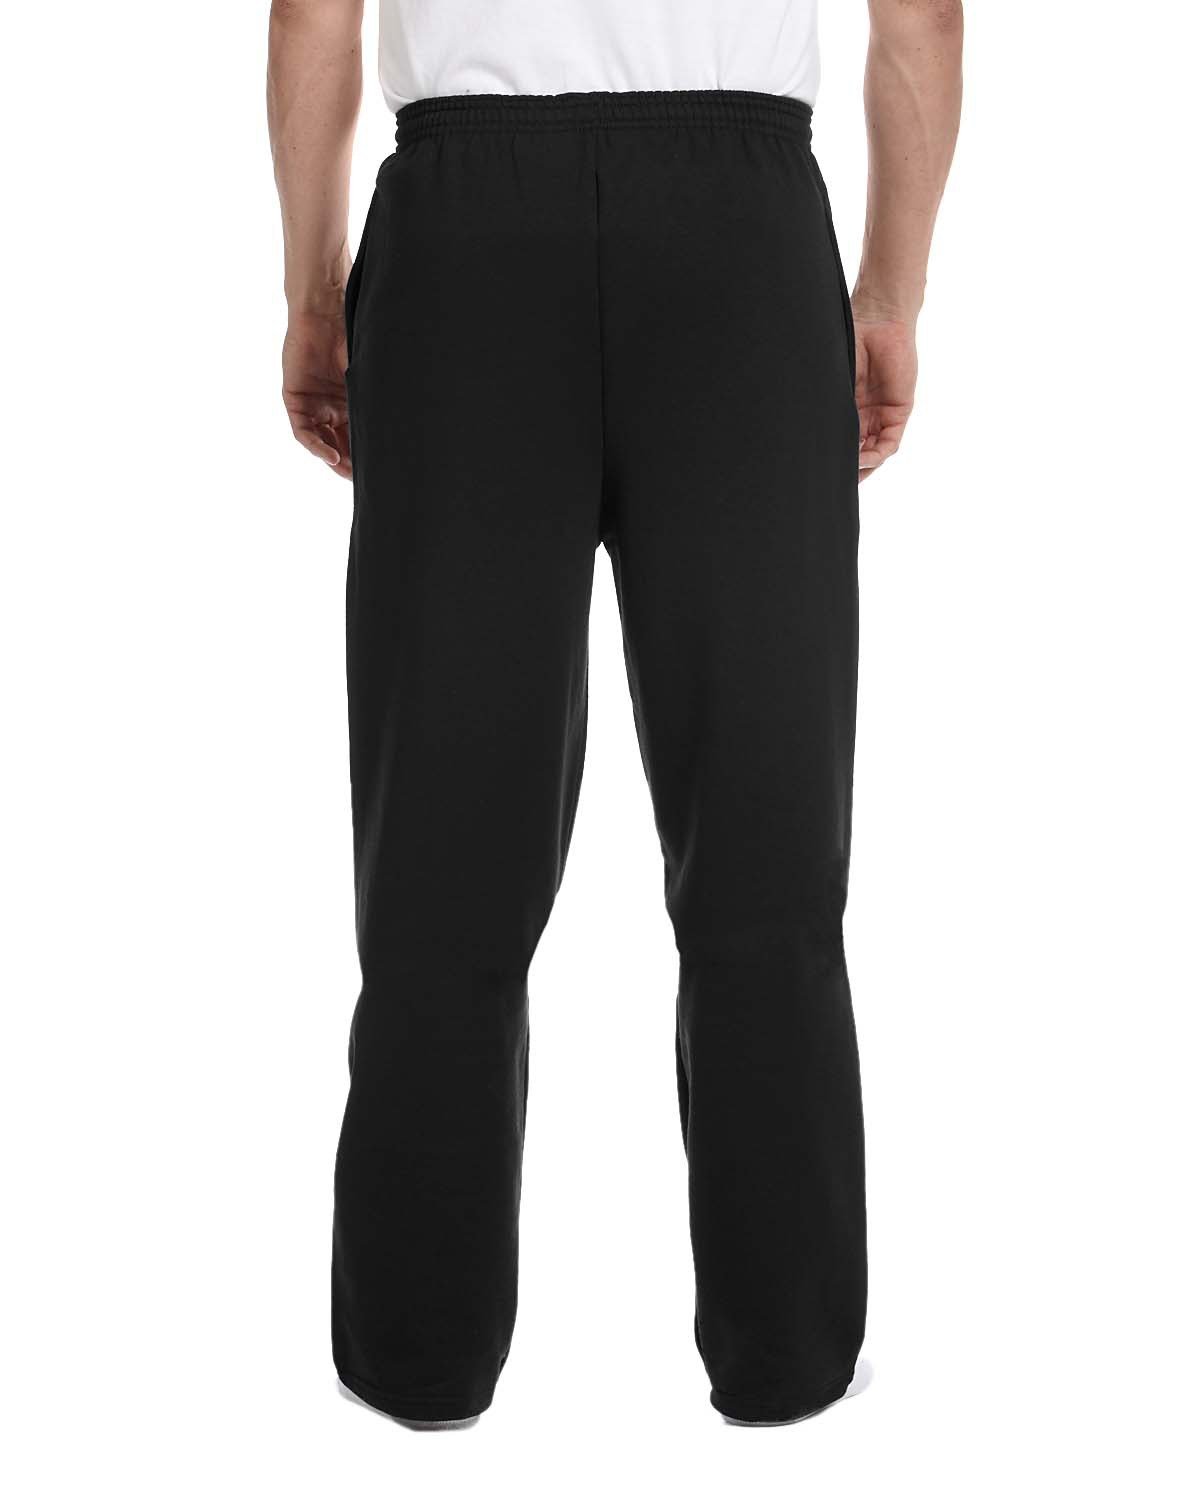 Champion P800 Powerblend® Open-Bottom Fleece Pant with Pockets